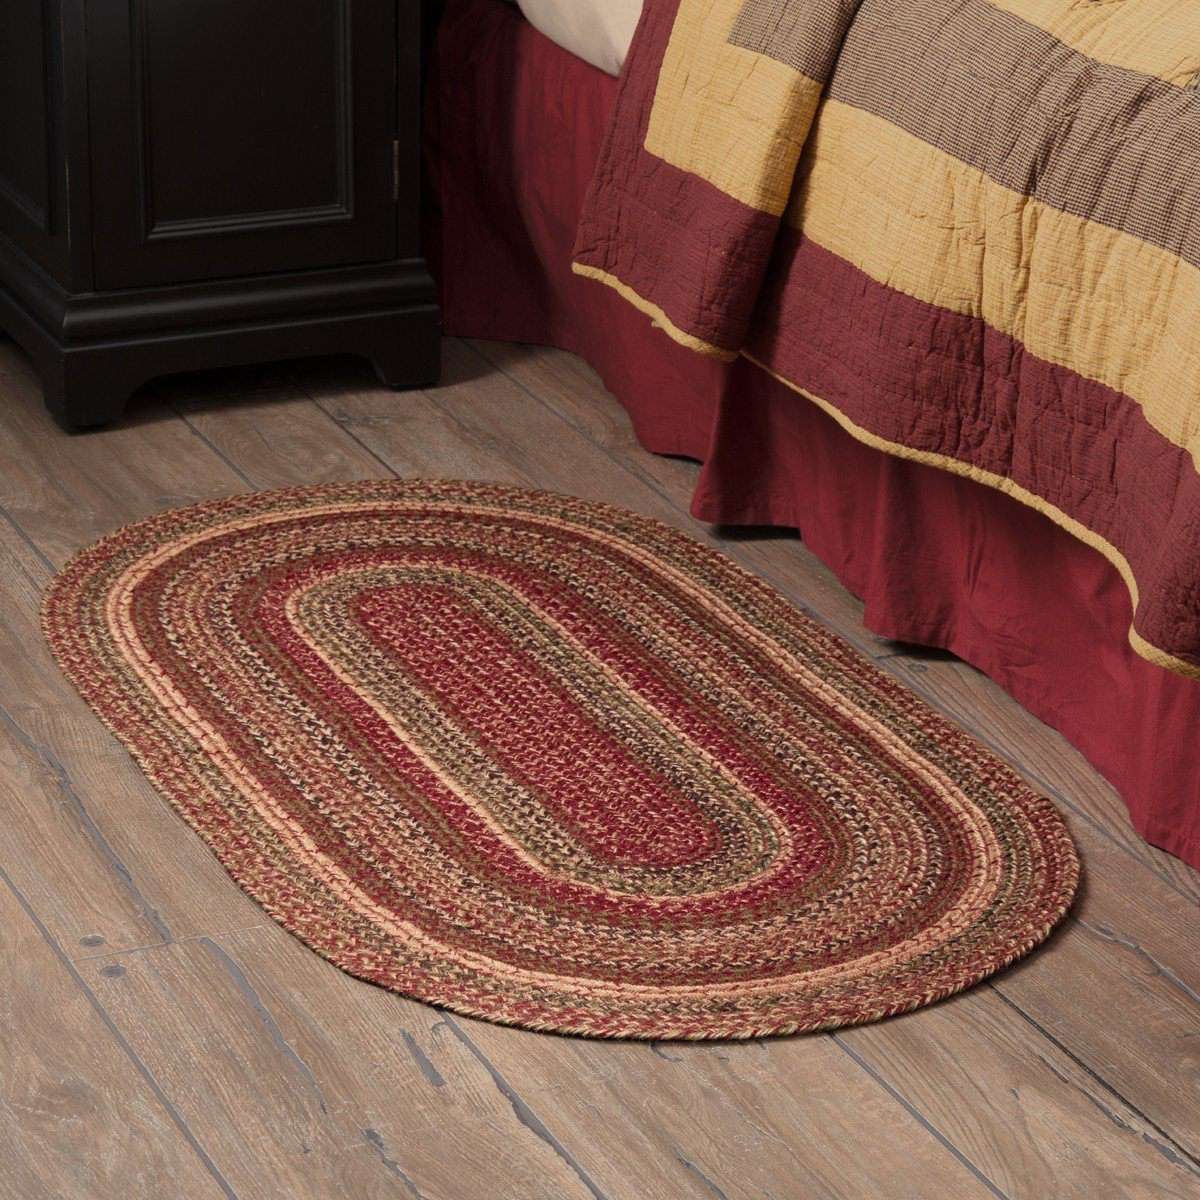 Cider Mill Jute Braided Rugs Oval VHC Brands Rugs VHC Brands 27" x 48" 